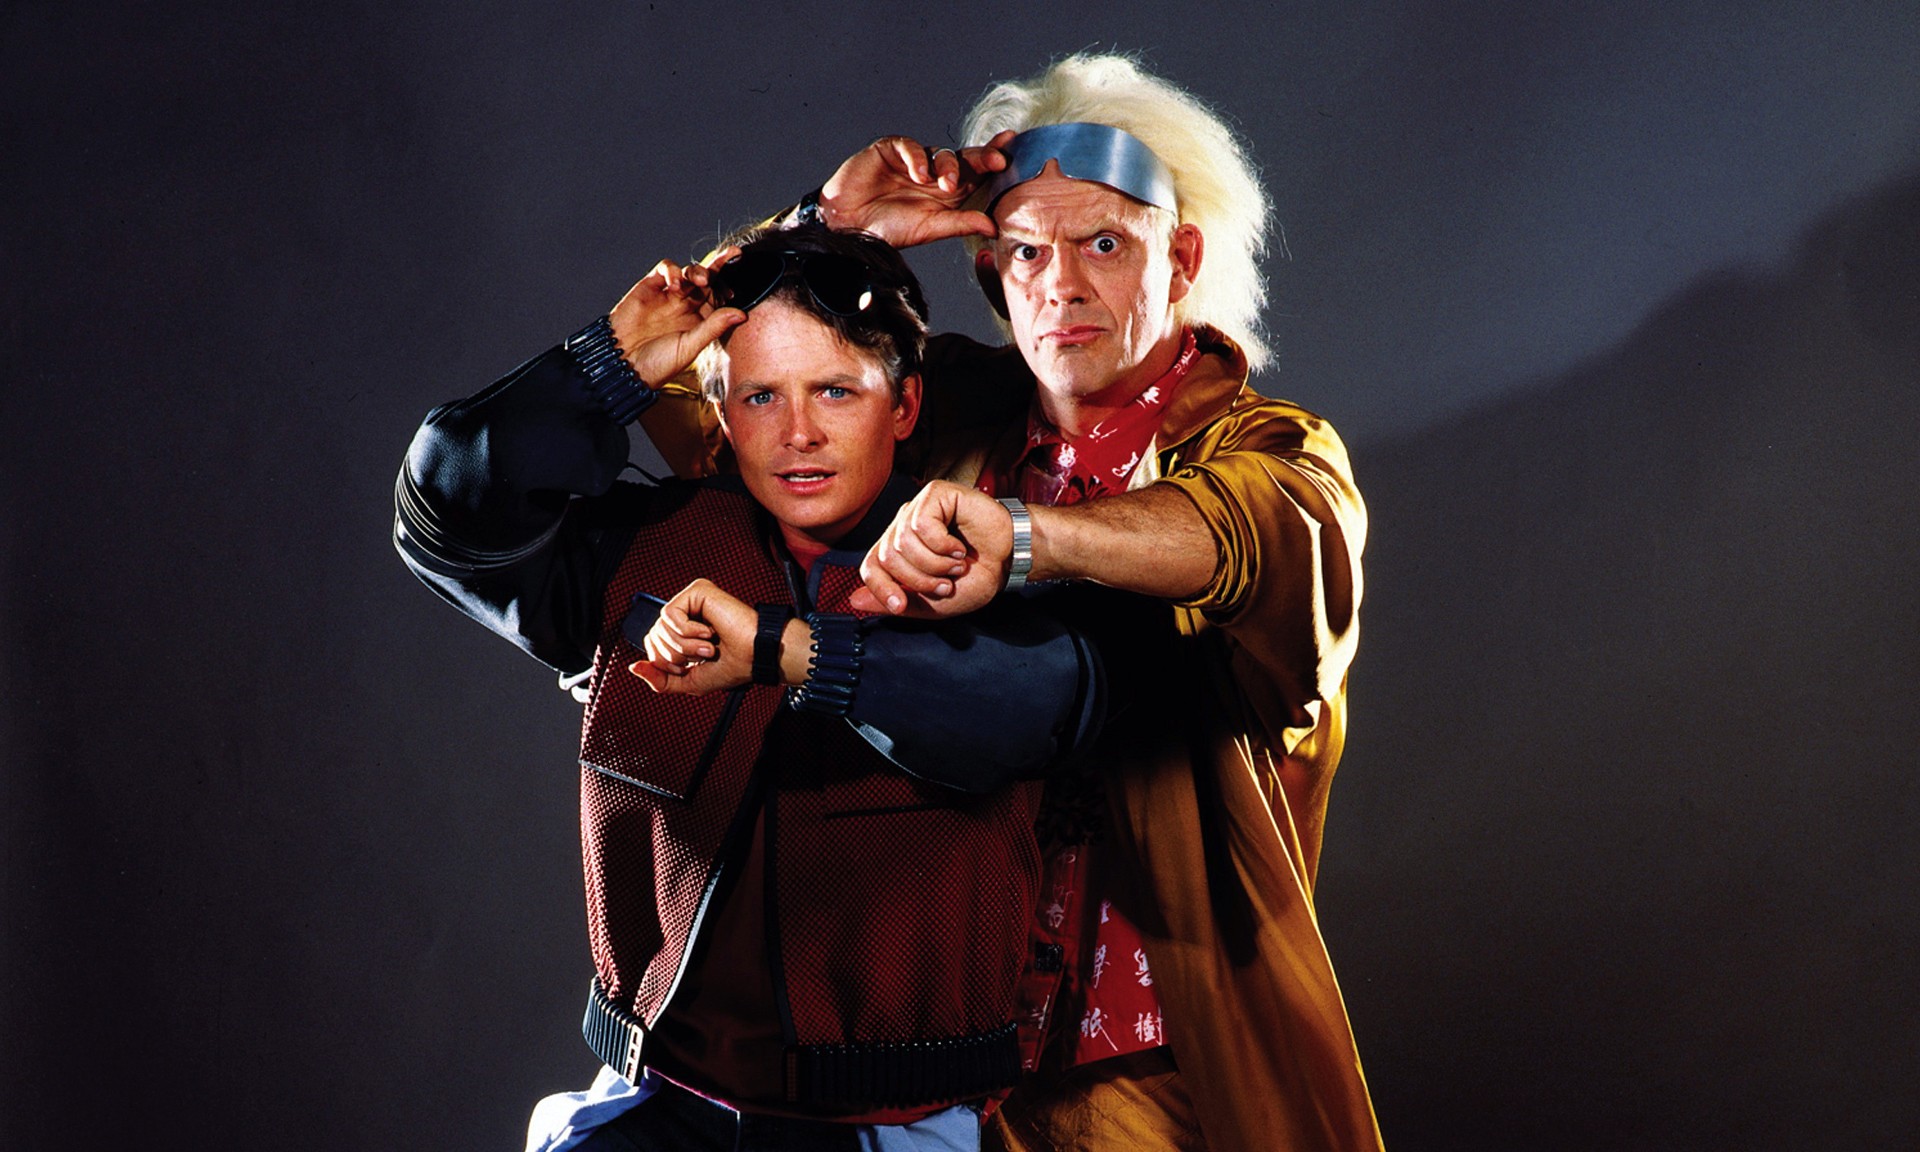 Michael J Fox Christopher Lloyd Back To The Future Marty McFly Humor 1920x1152